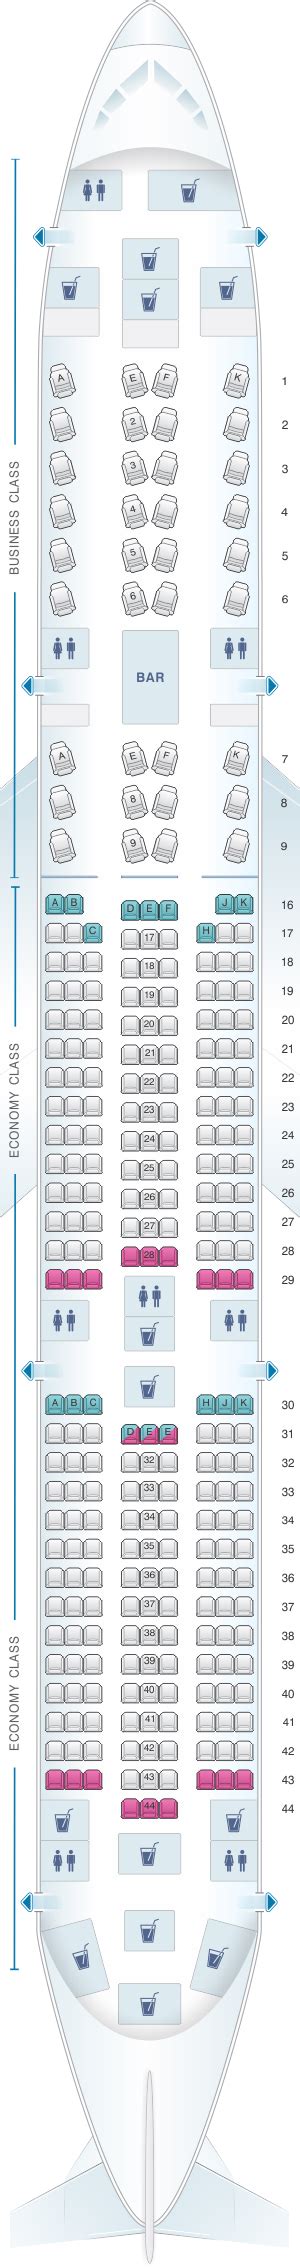 Seat Map Airbus A Qatar Airways Best Seats In The Plane SexiezPicz